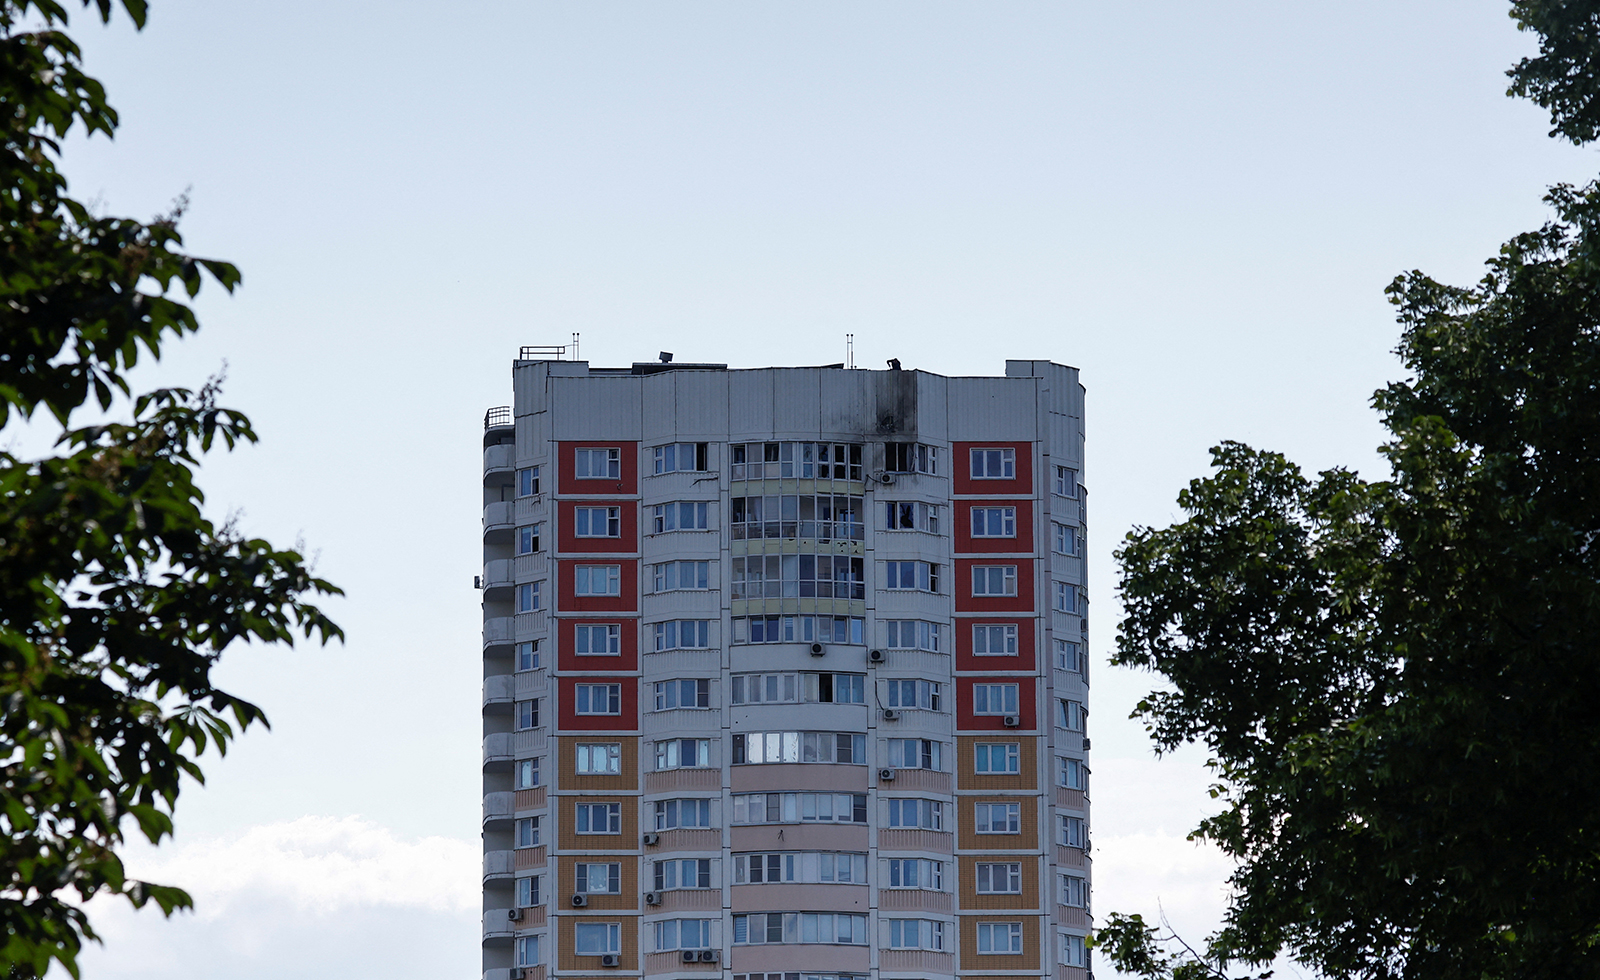 This picture shows a damaged multi-storey apartment block following a reported drone attack in Moscow, Russia, on May 30.